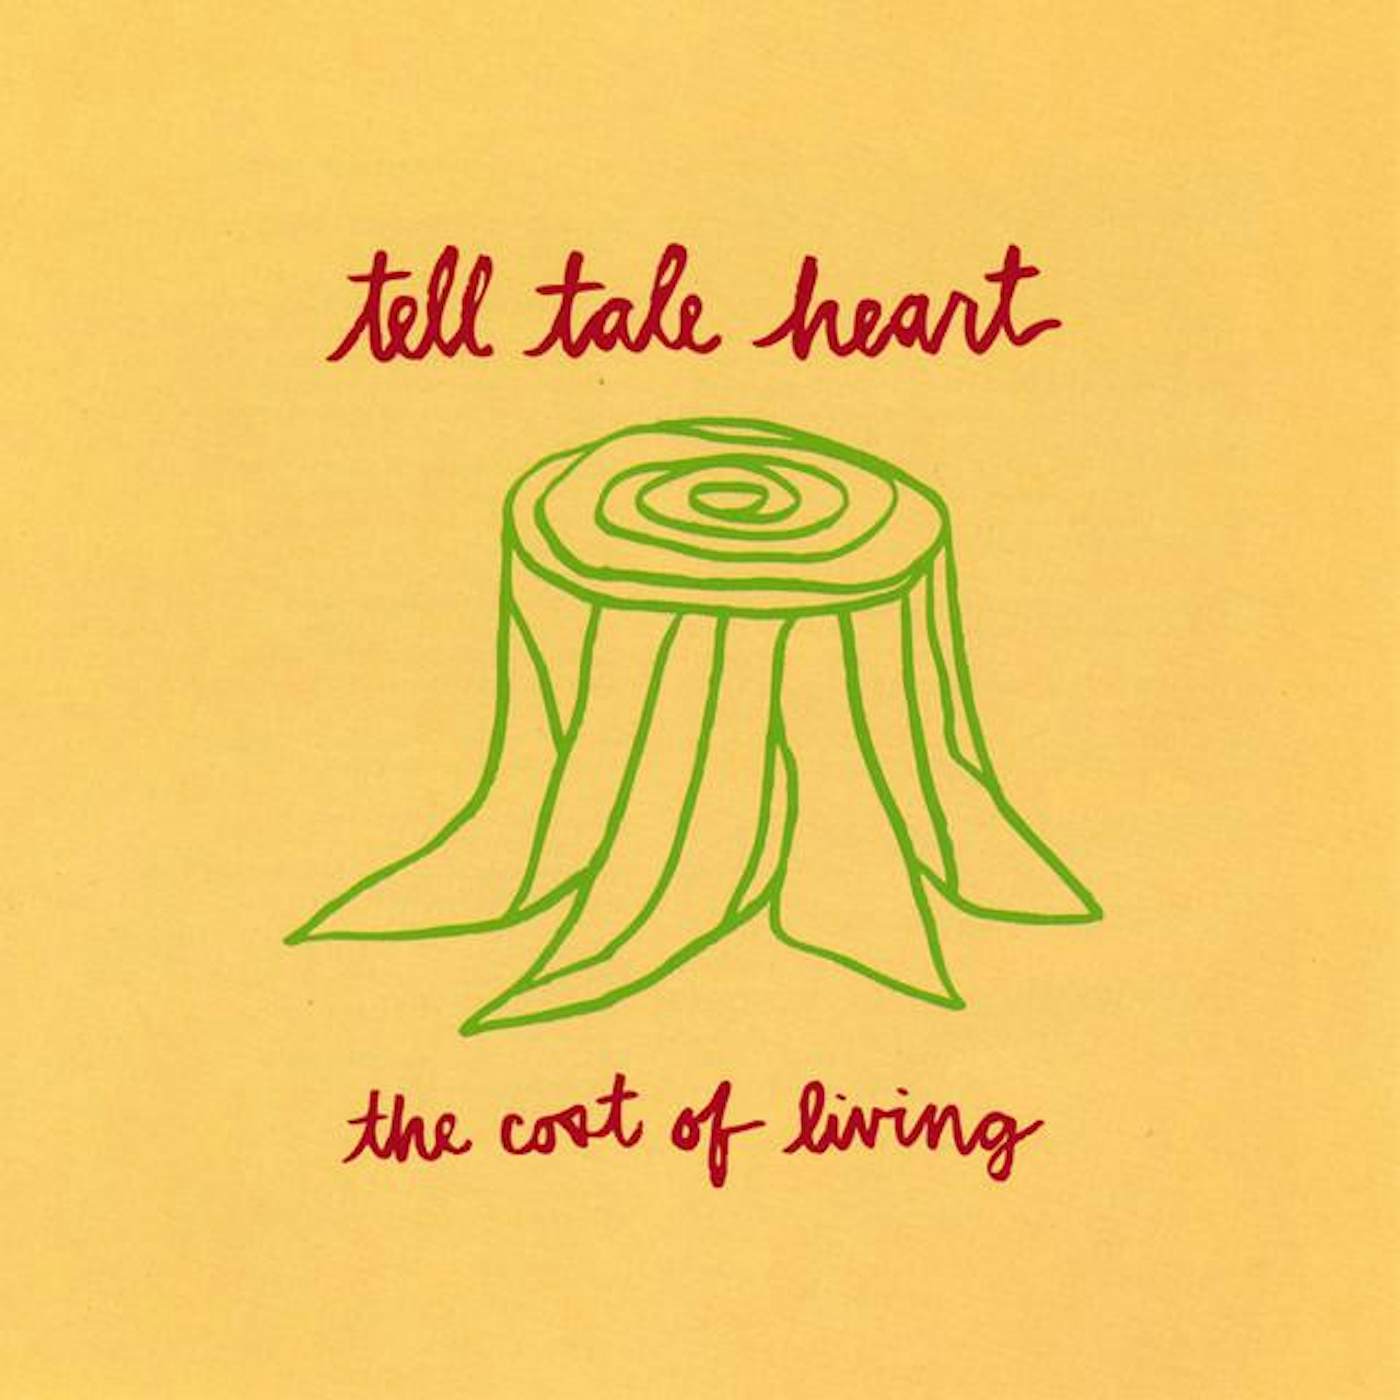 The Tell-Tale Hearts